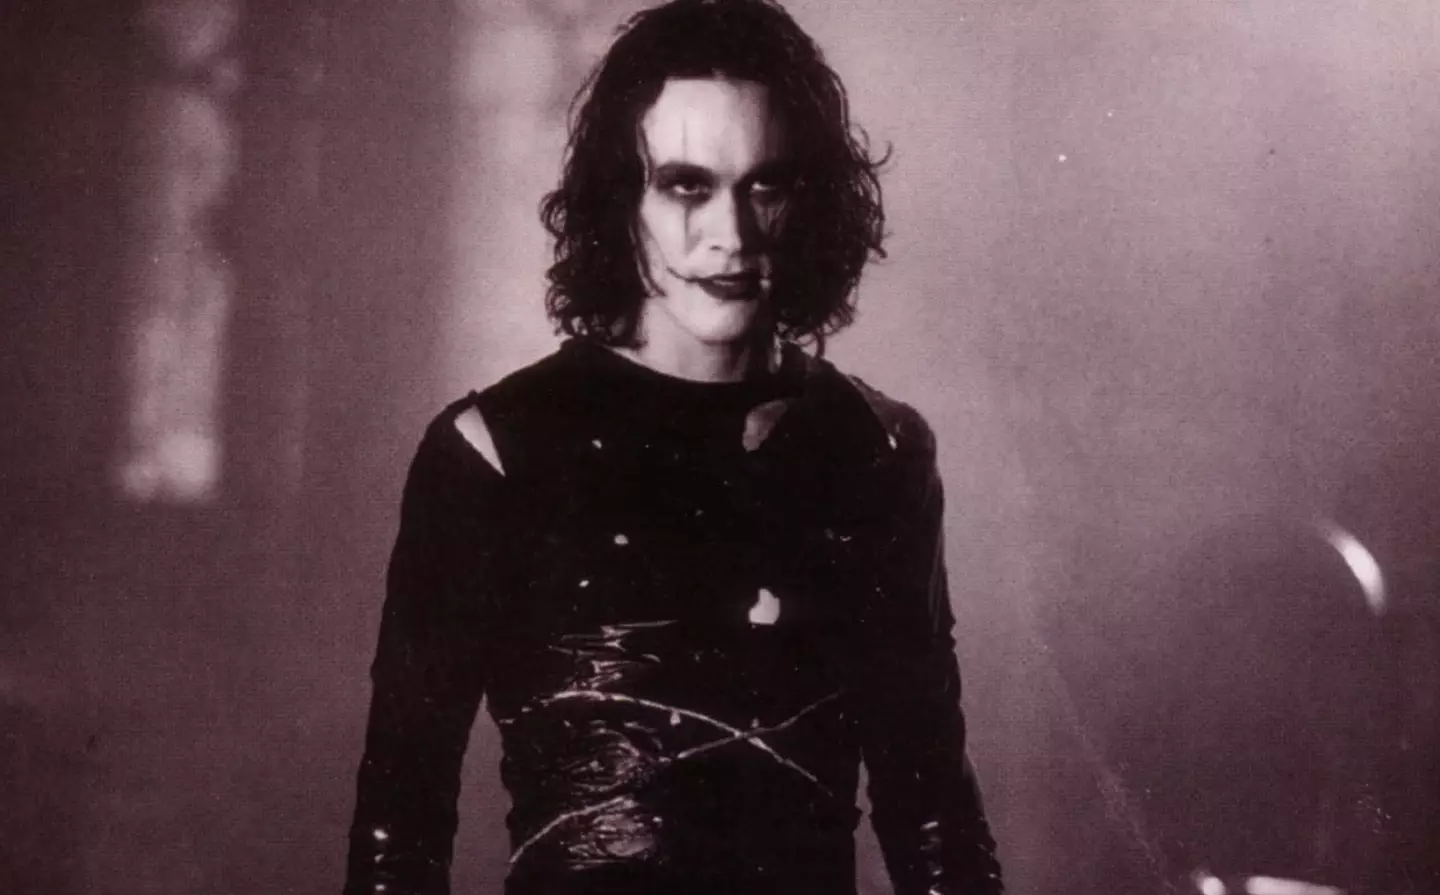 The 1994 film was Brandon Lee's final role.